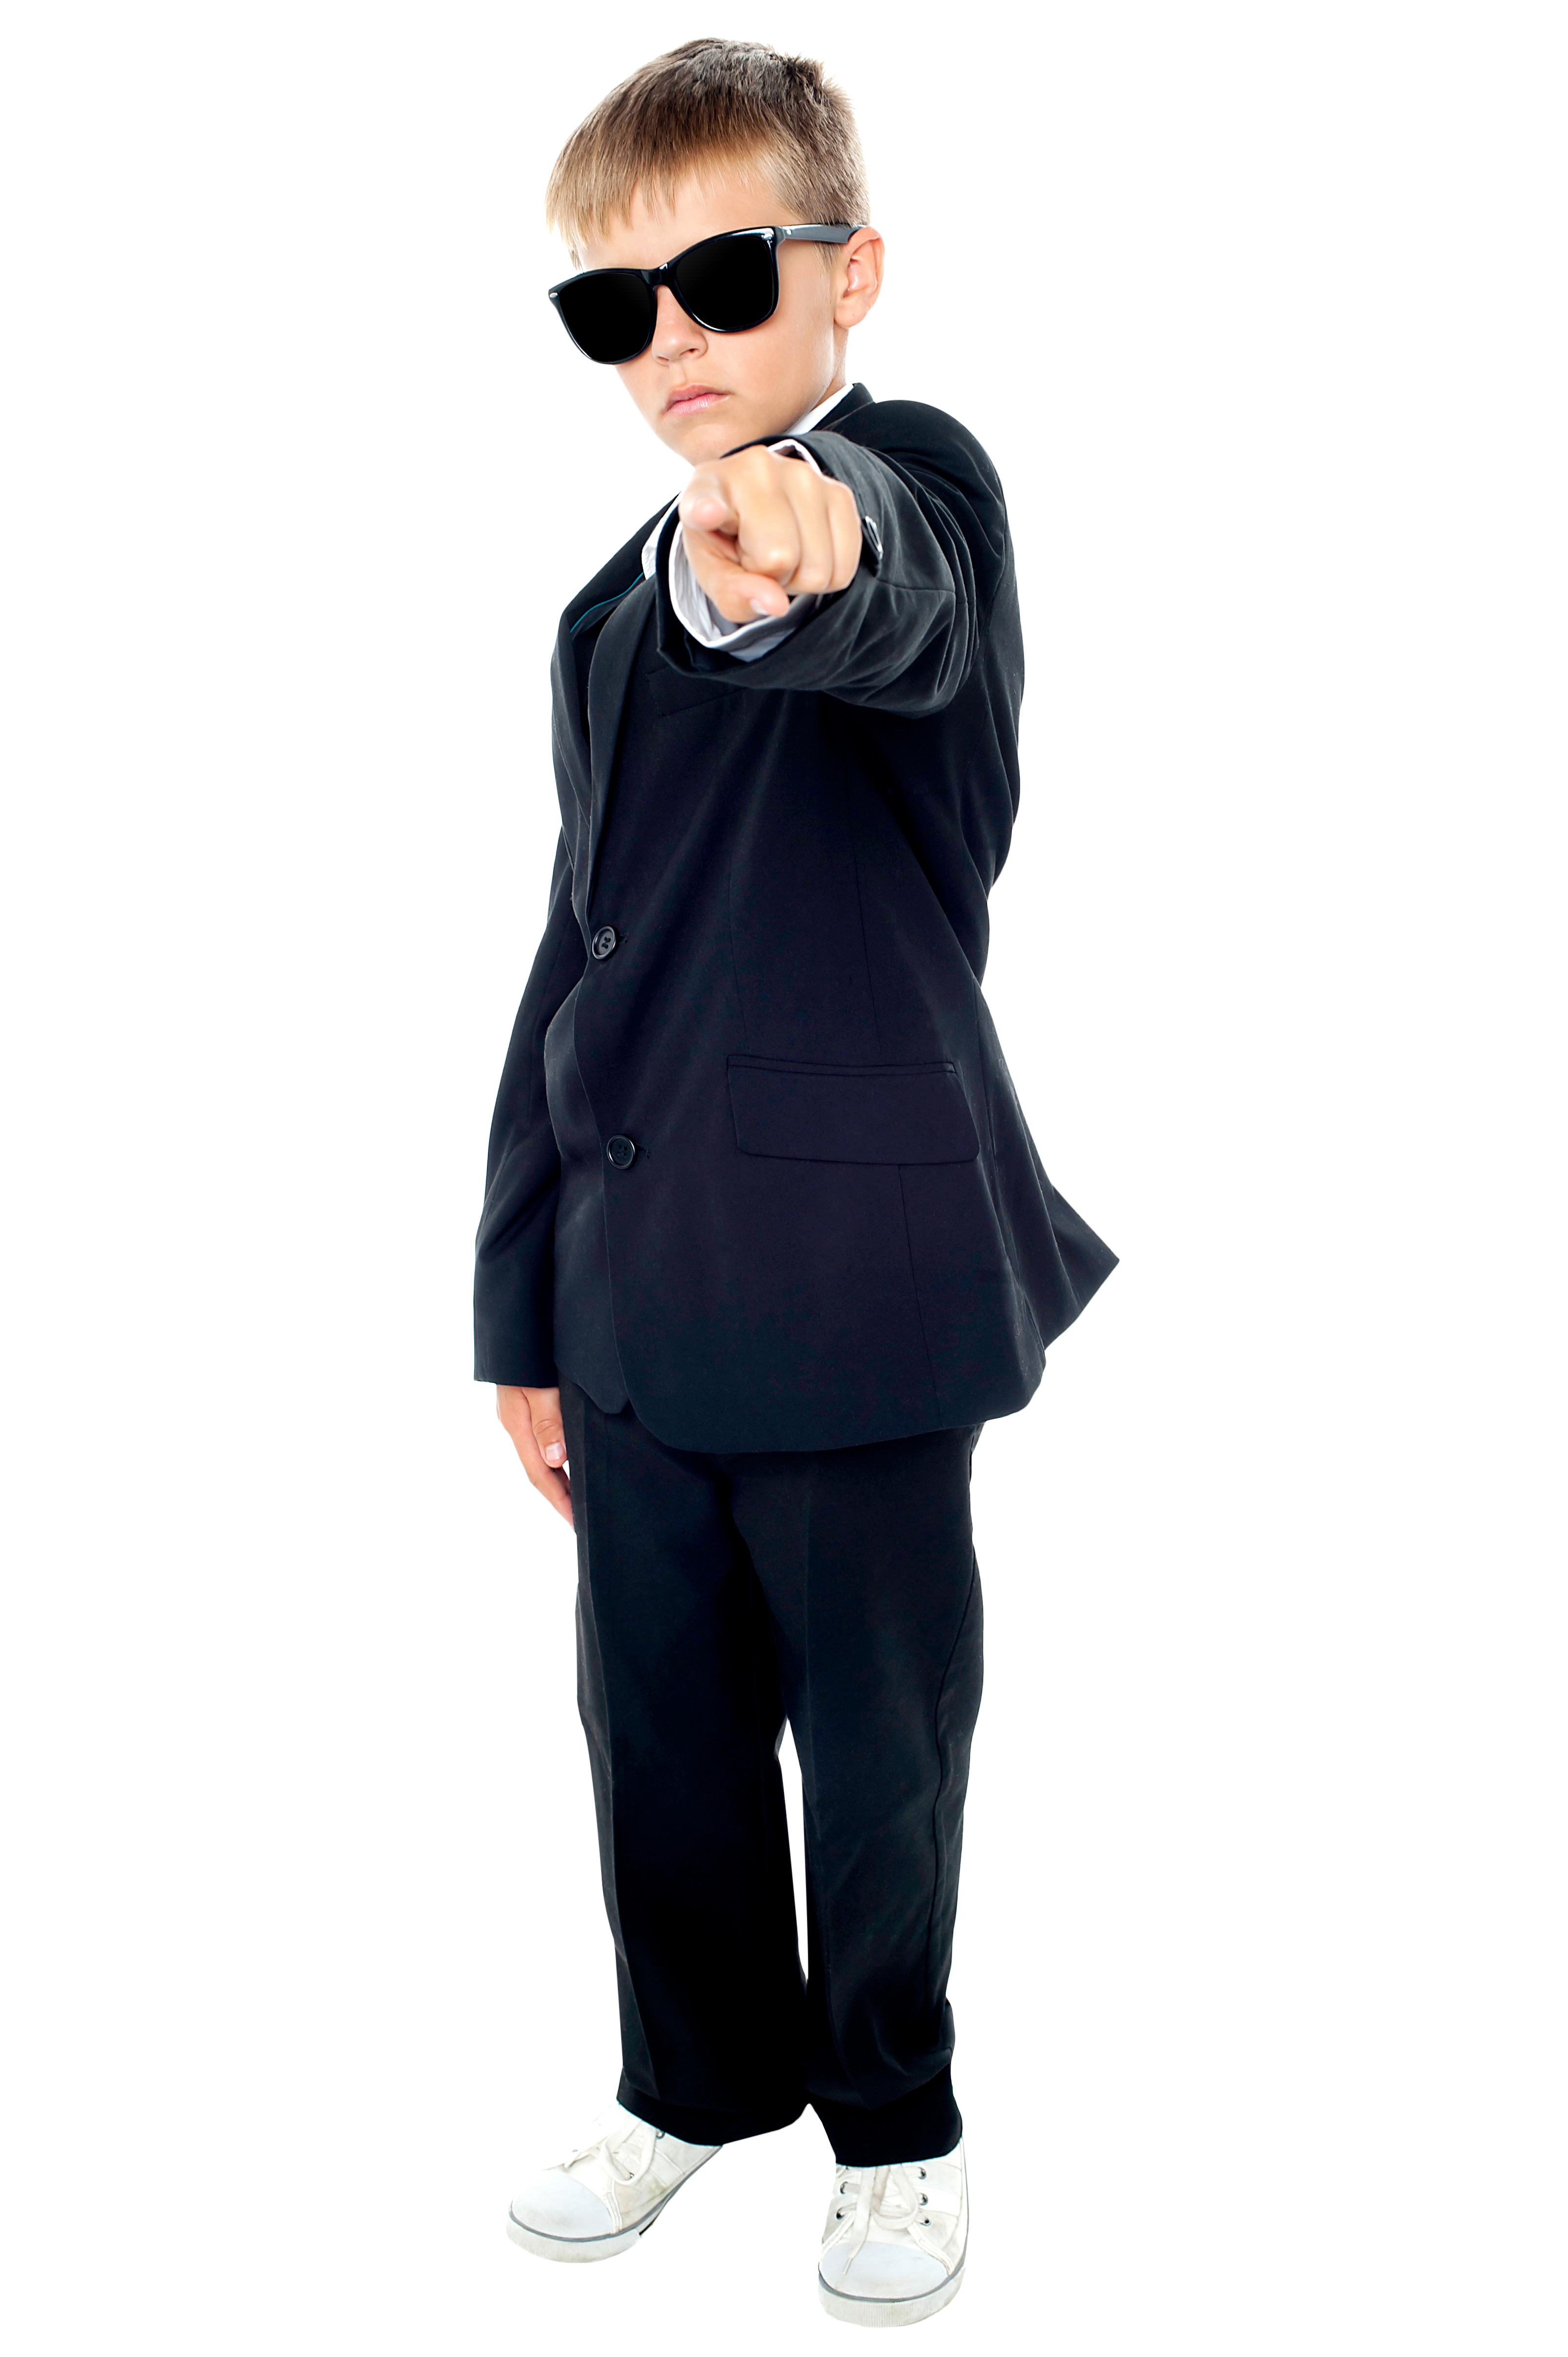 Men Pointing Front PNG Image